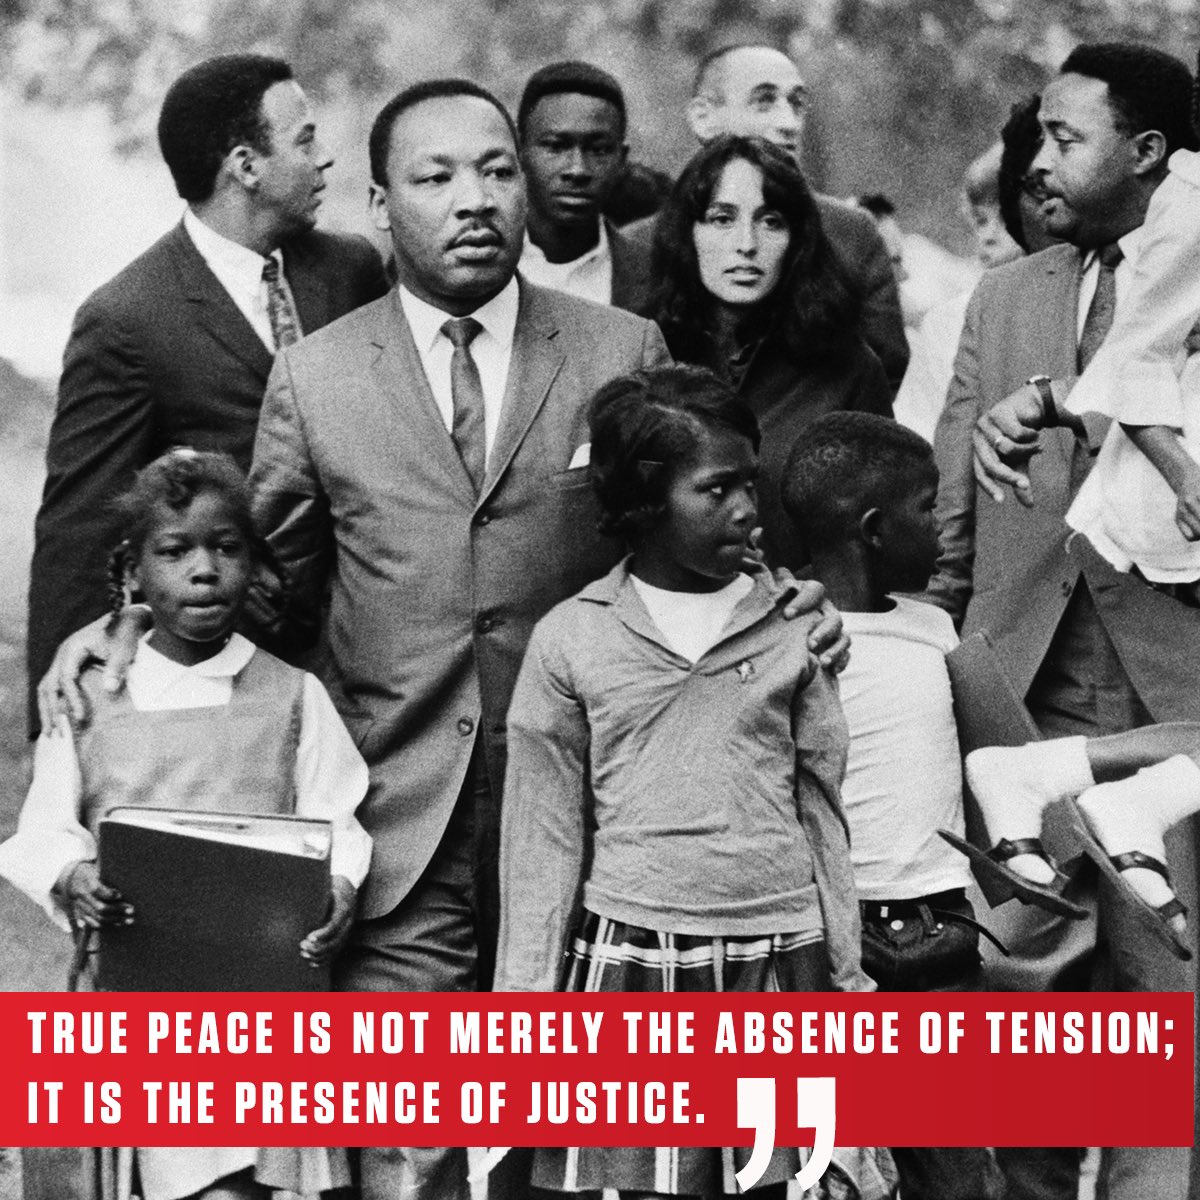 “True peace is not merely the absence of tension; it is the presence of justice.”